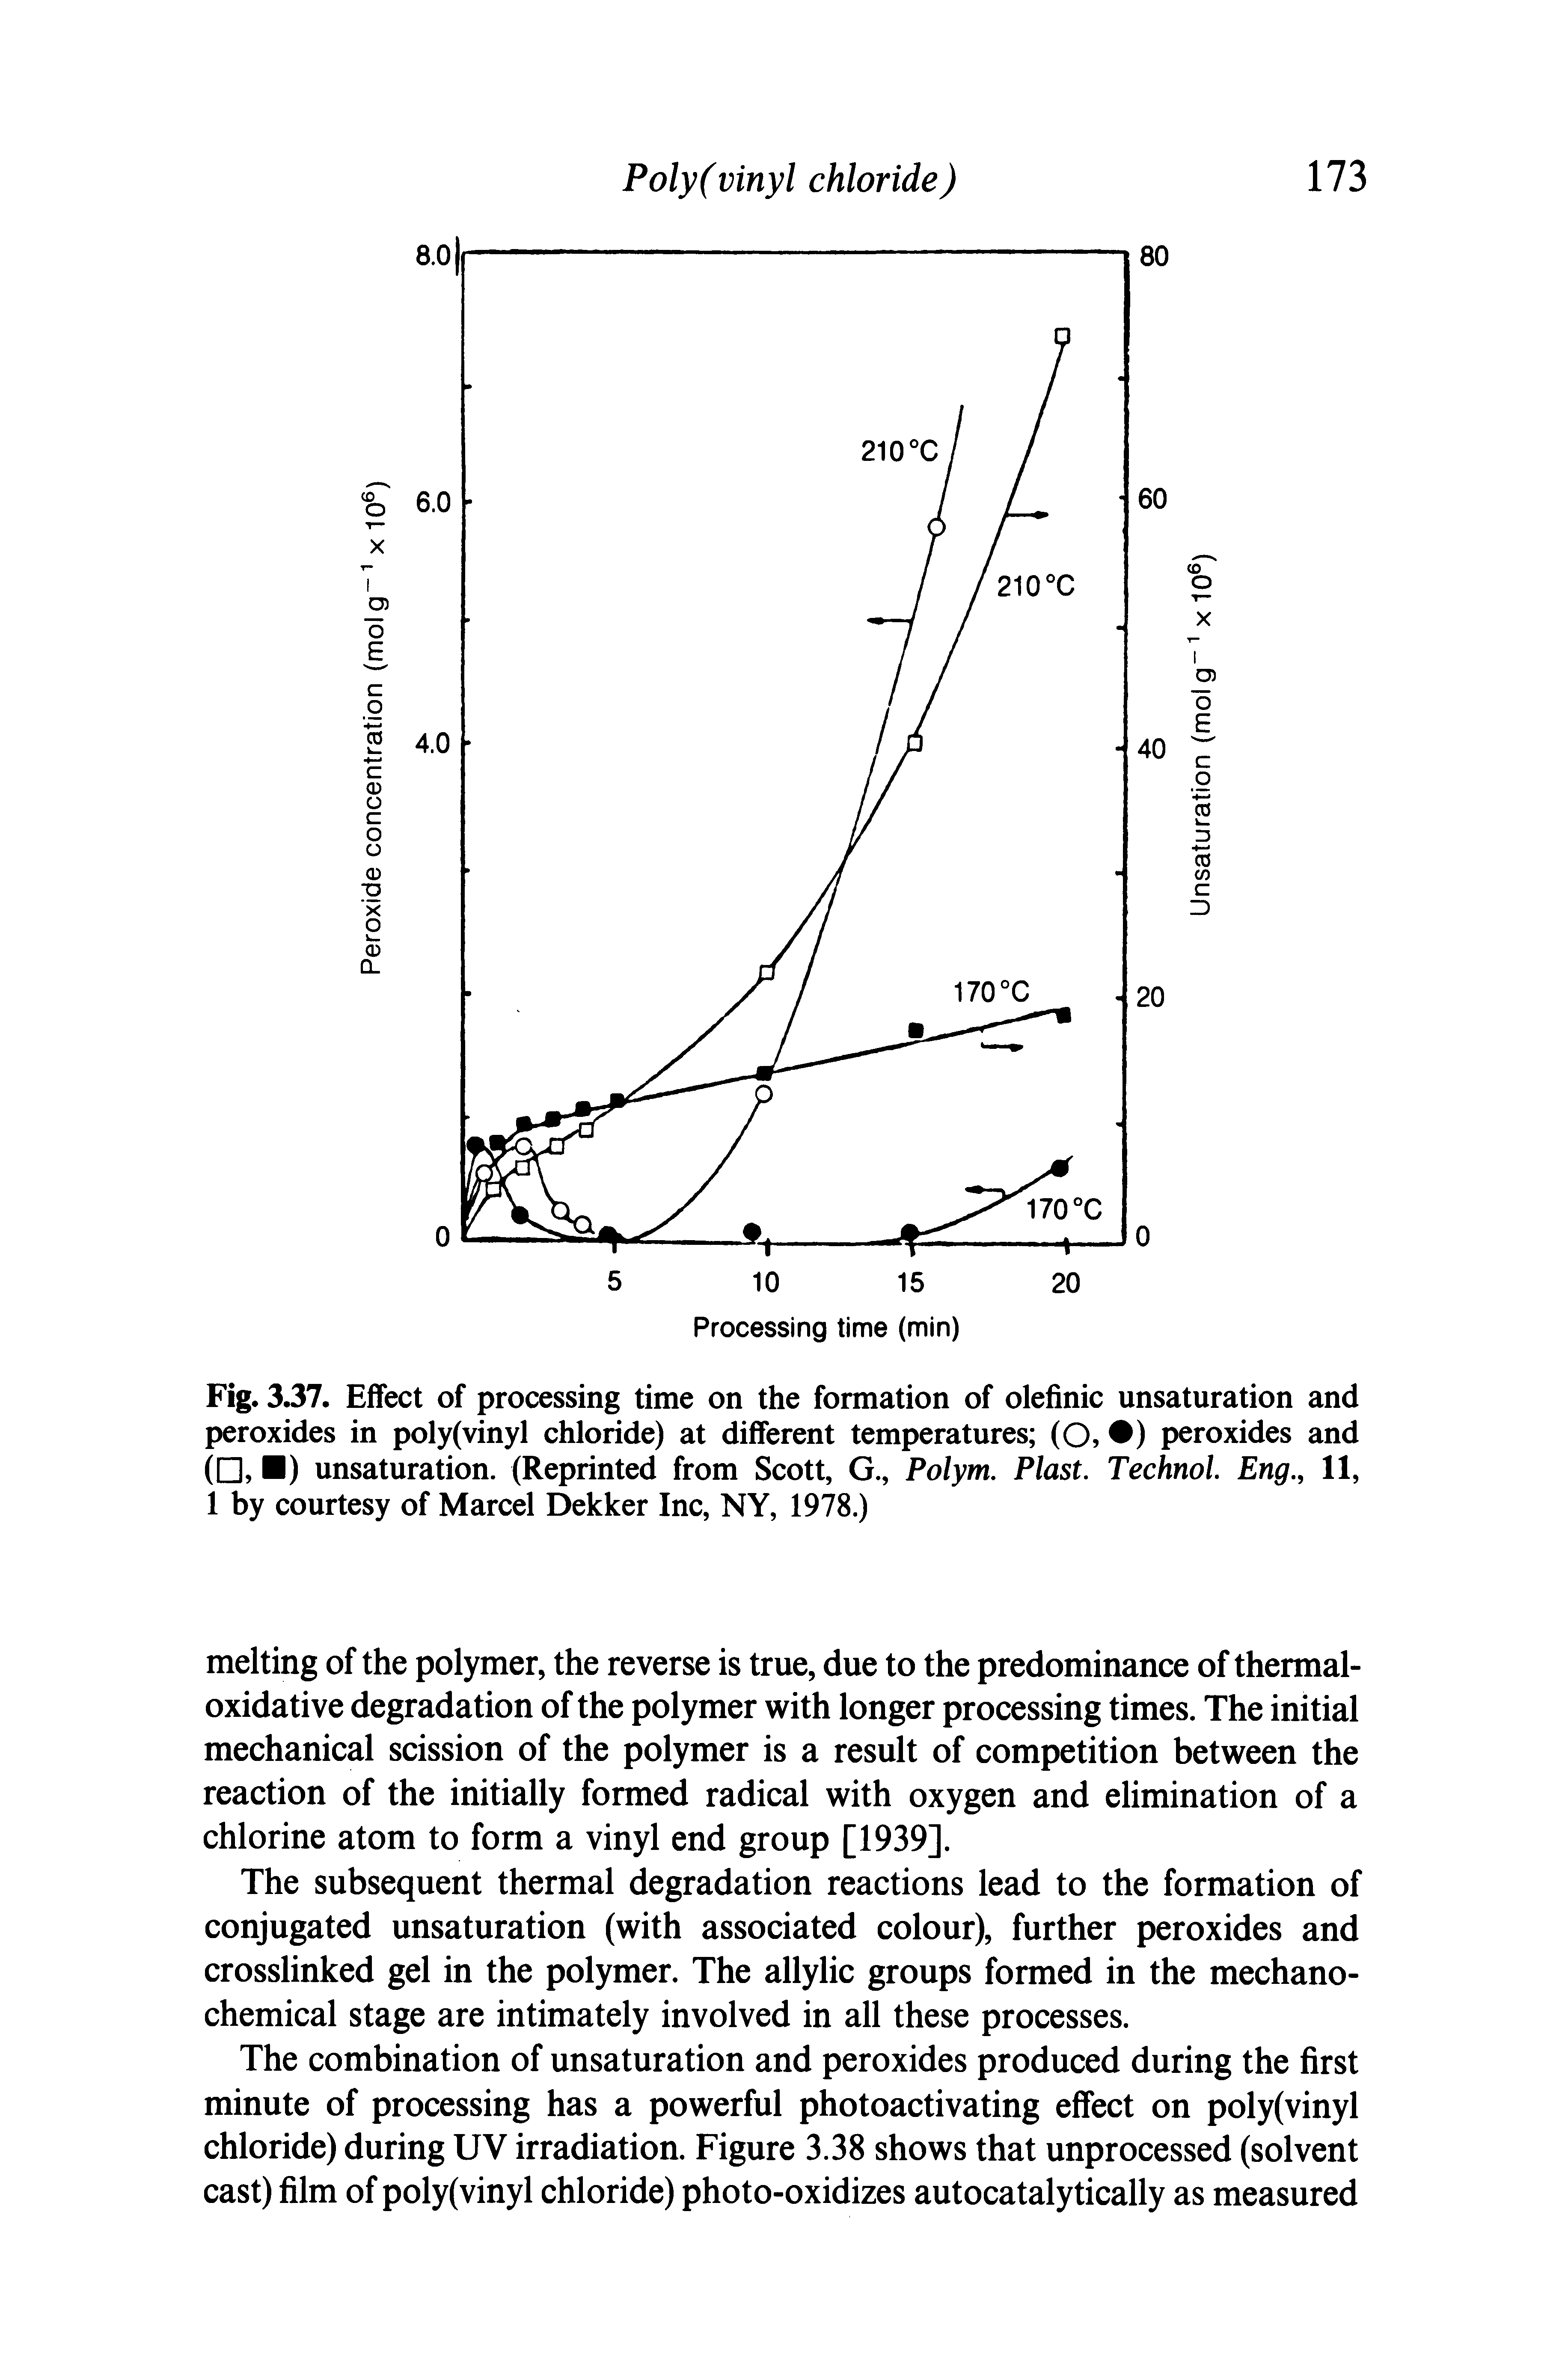 Fig. 3.37. Effect of processing time on the formation of olefinic unsaturation and peroxides in poly(vinyl chloride) at different temperatures (O, ) peroxides and ( , ) unsaturation. (Reprinted from Scott, G., Polym, Plast. Technol. Eng., 11, 1 by courtesy of Marcel Dekker Inc, NY, 1978.)...